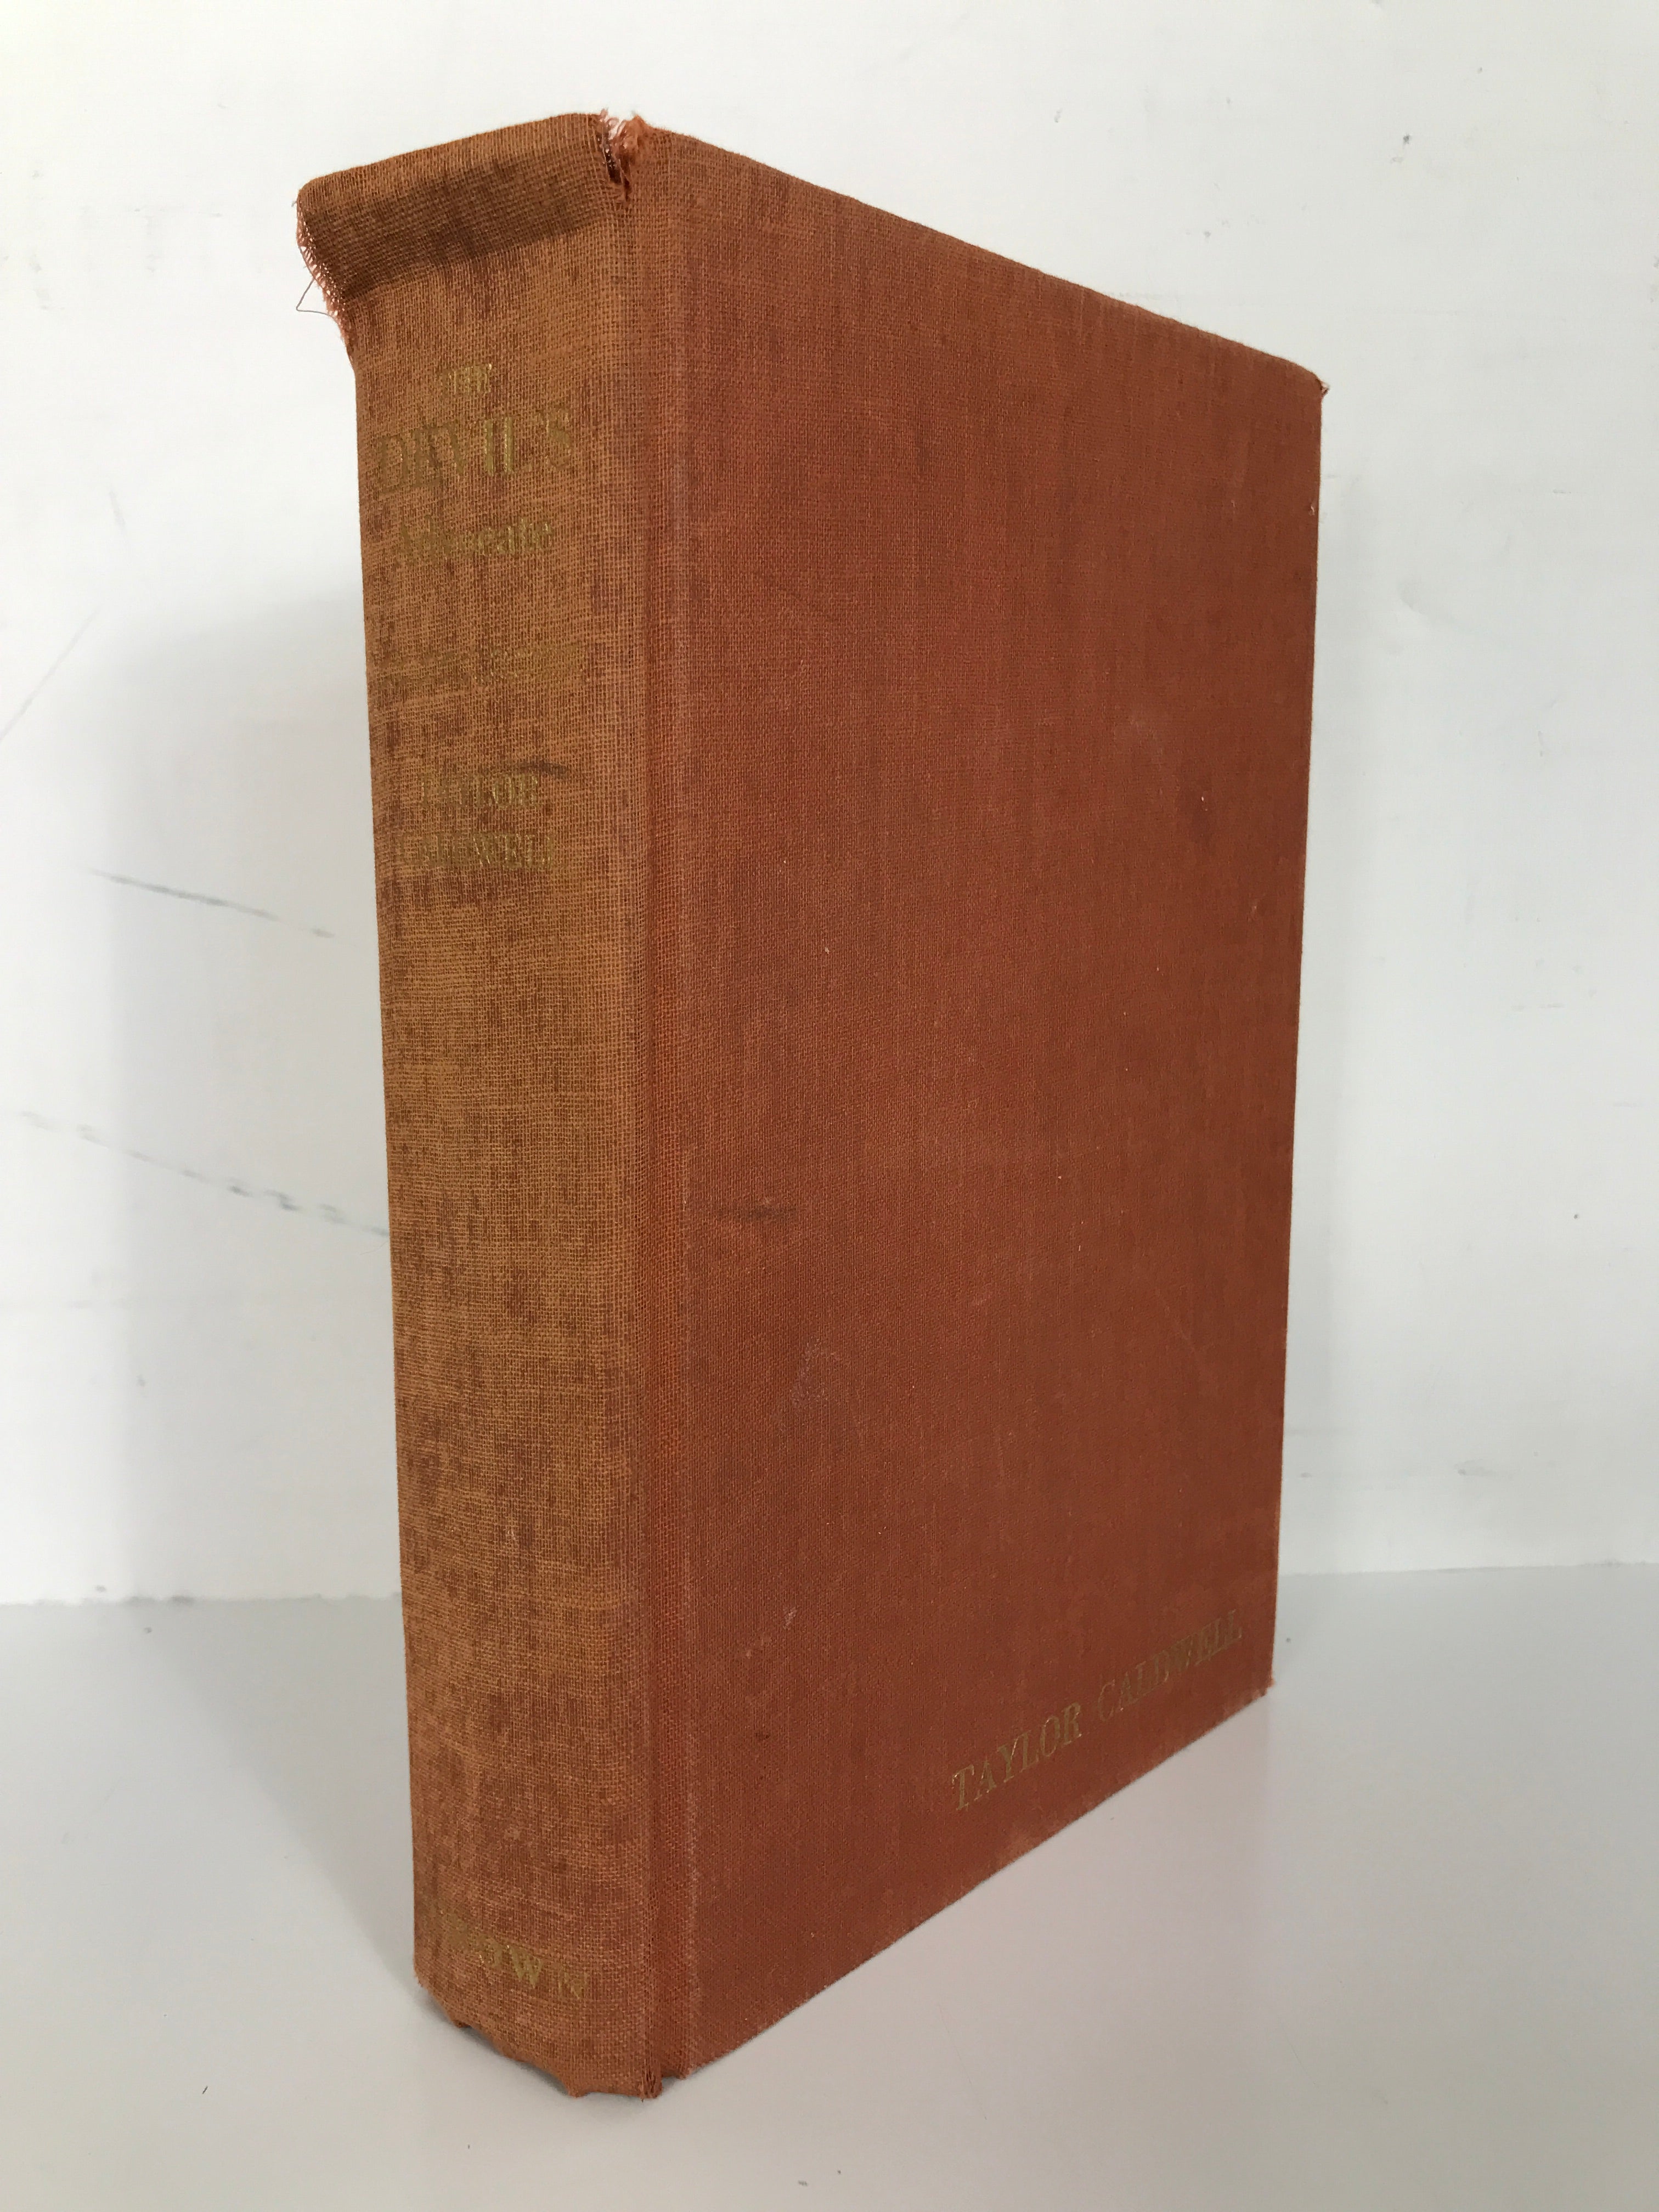 The Devil's Advocate by Taylor Caldwell 1952 First Edition HC Crown Publishers